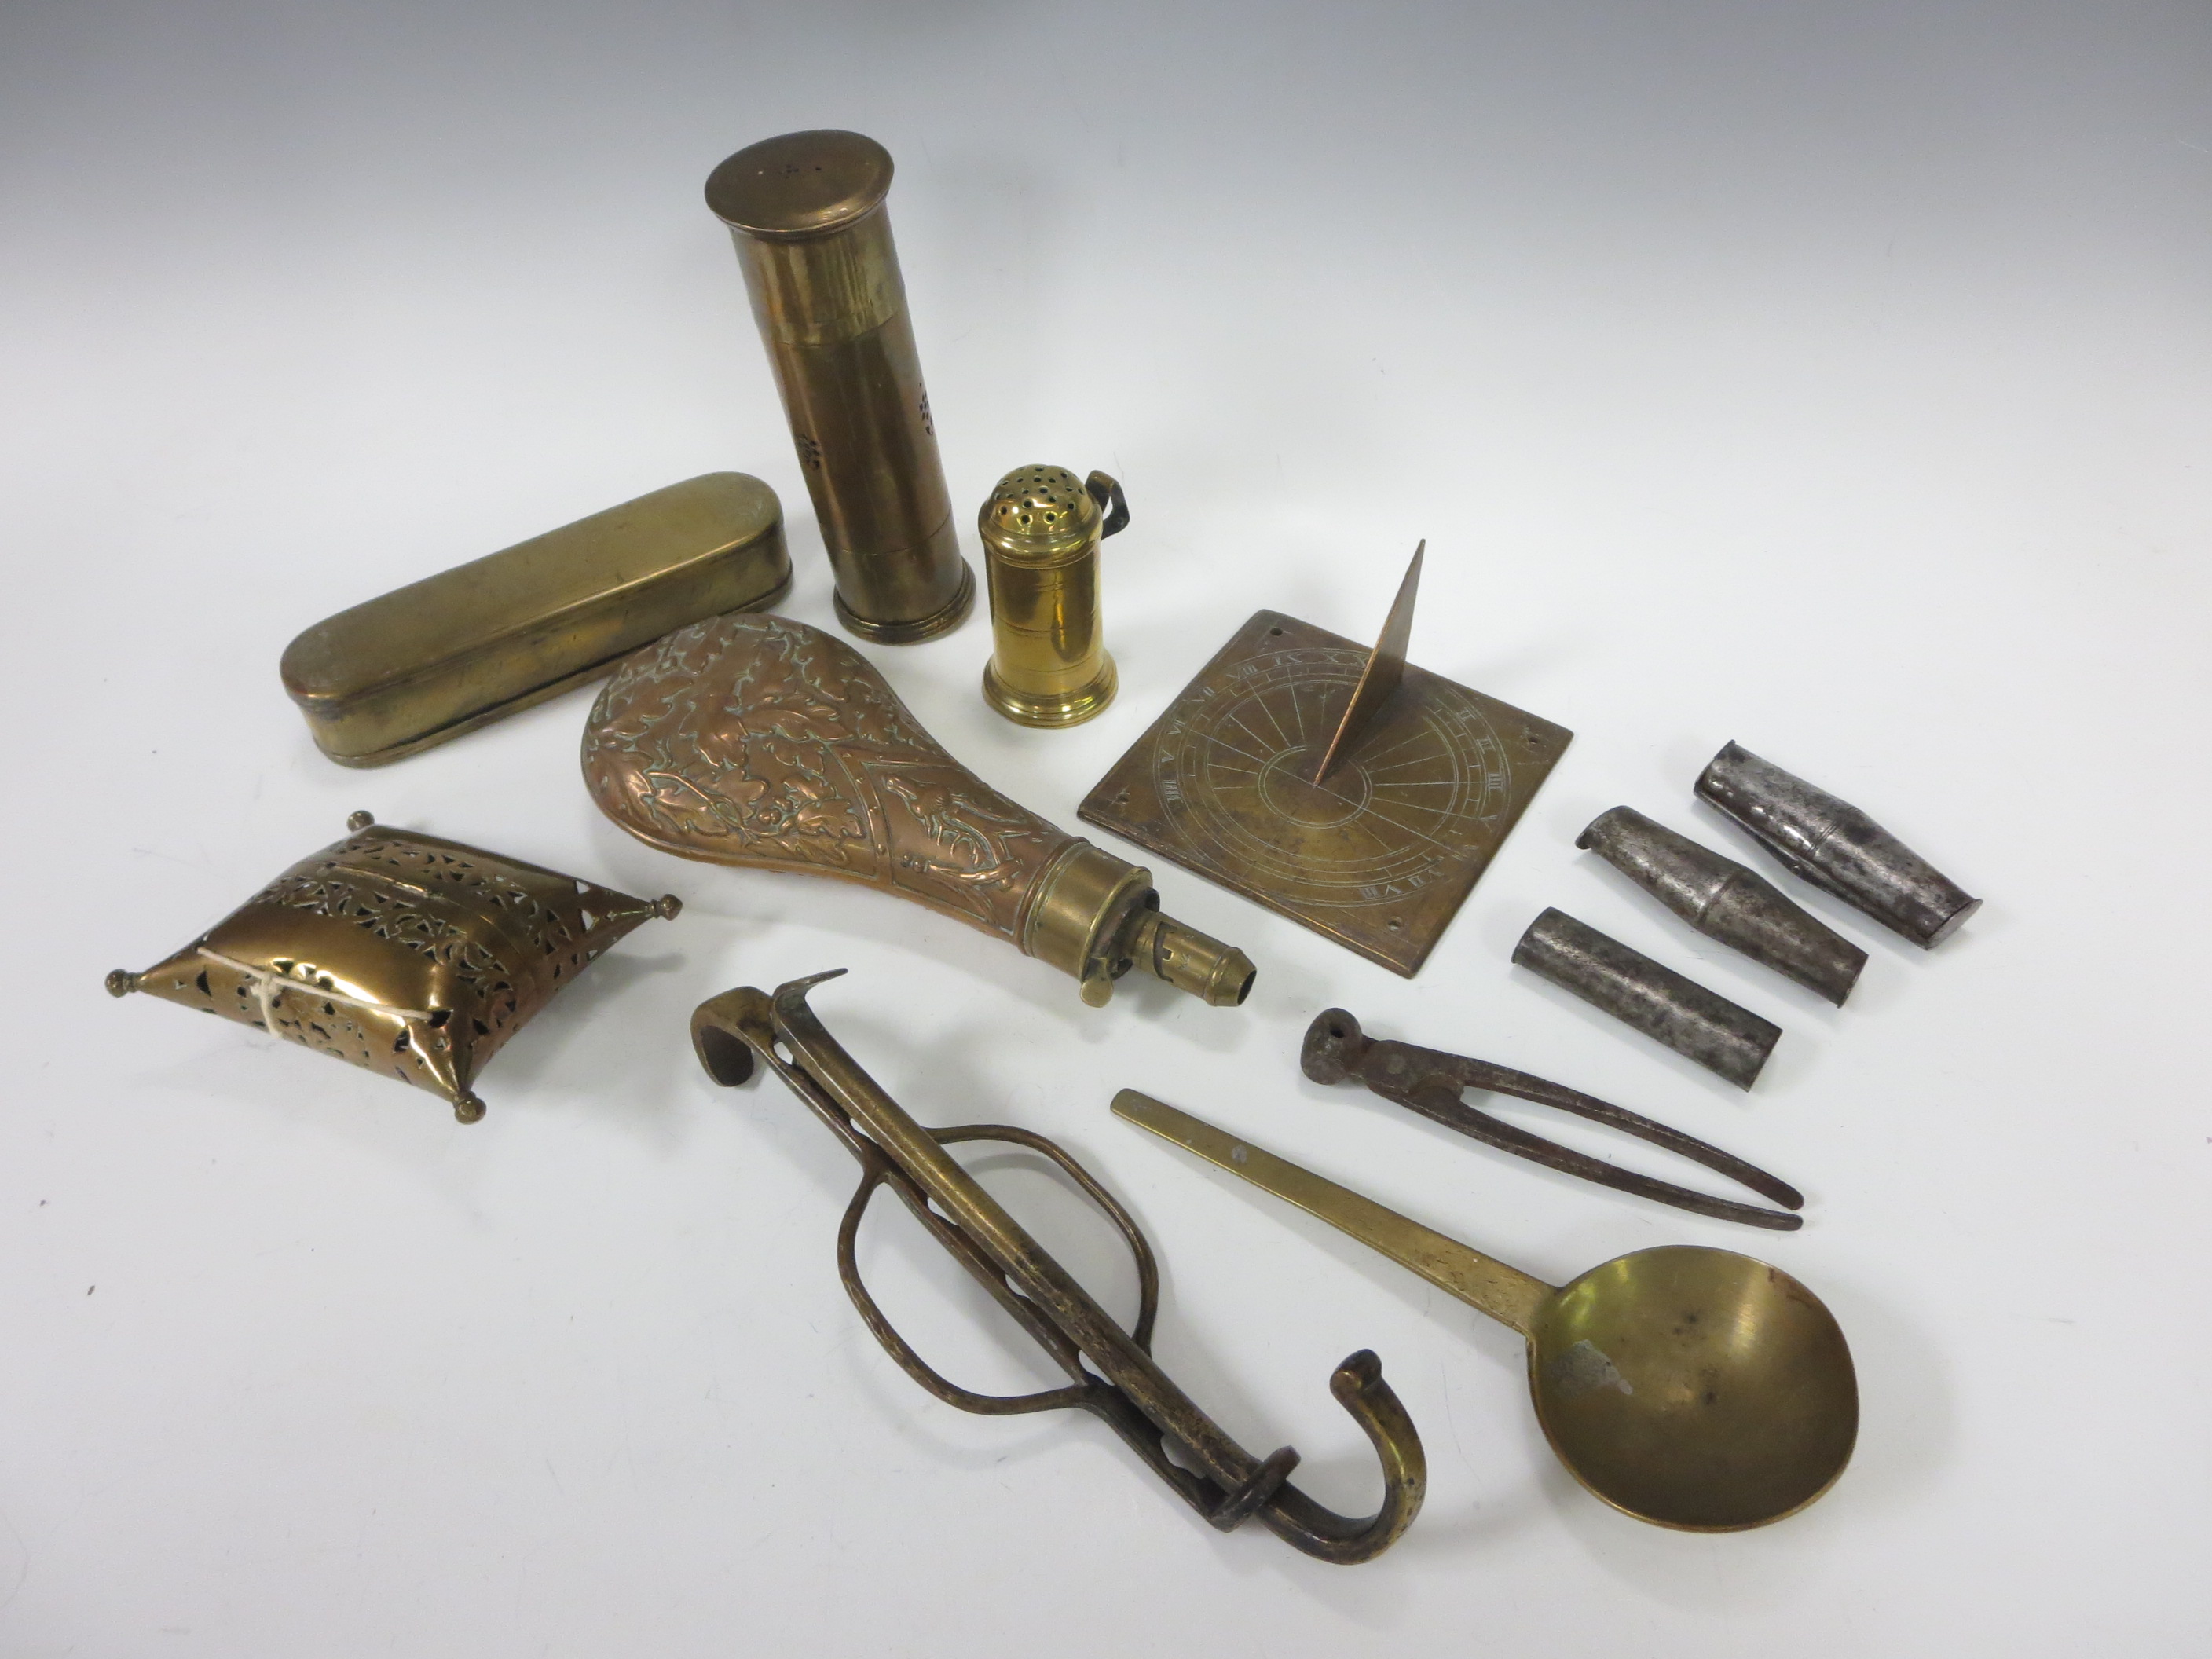 An antique Dutch brass Tobacco Box, a Sundial, embossed Shot Flask, Bullet Mould, steel Bullet